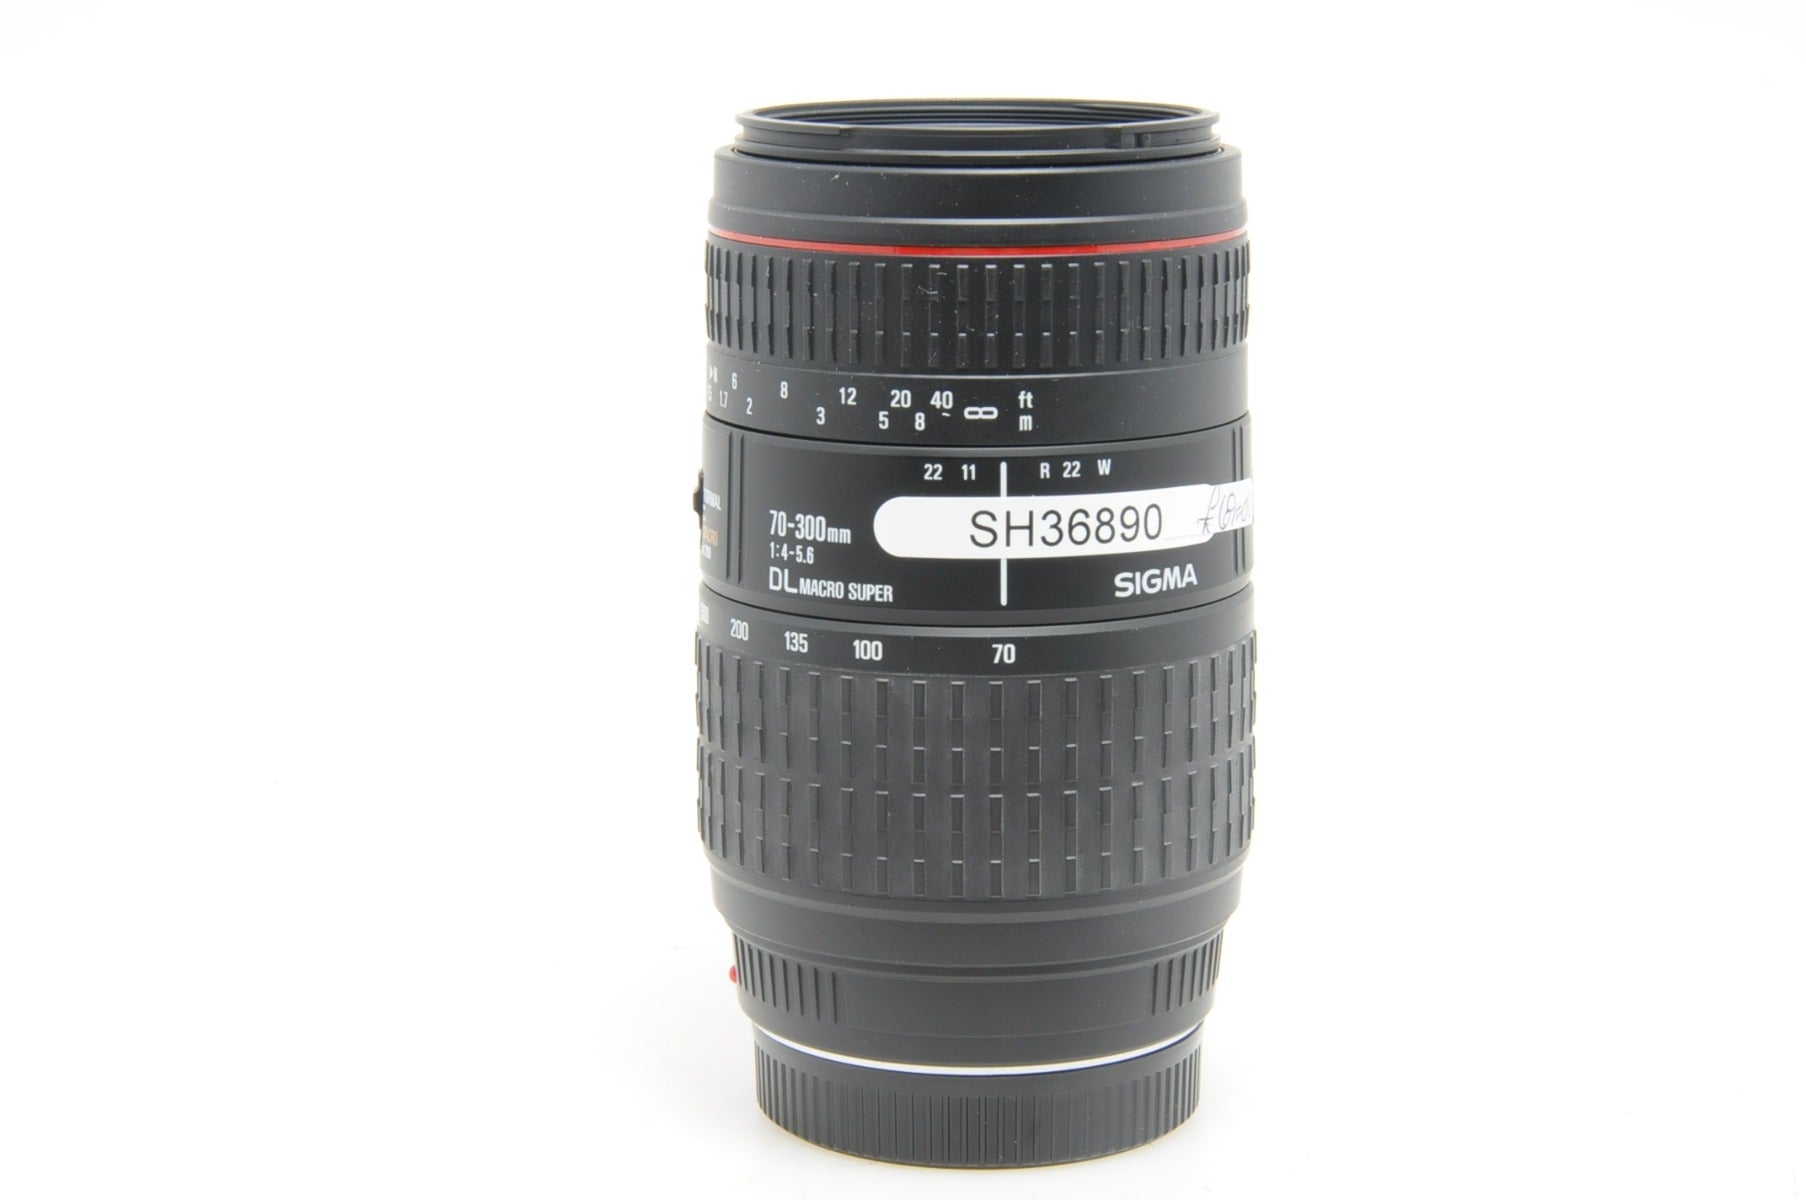 Product Image of Used Sigma 70-300mm F4.5/5.6 DL Macro Super lens Sony (SH36890)